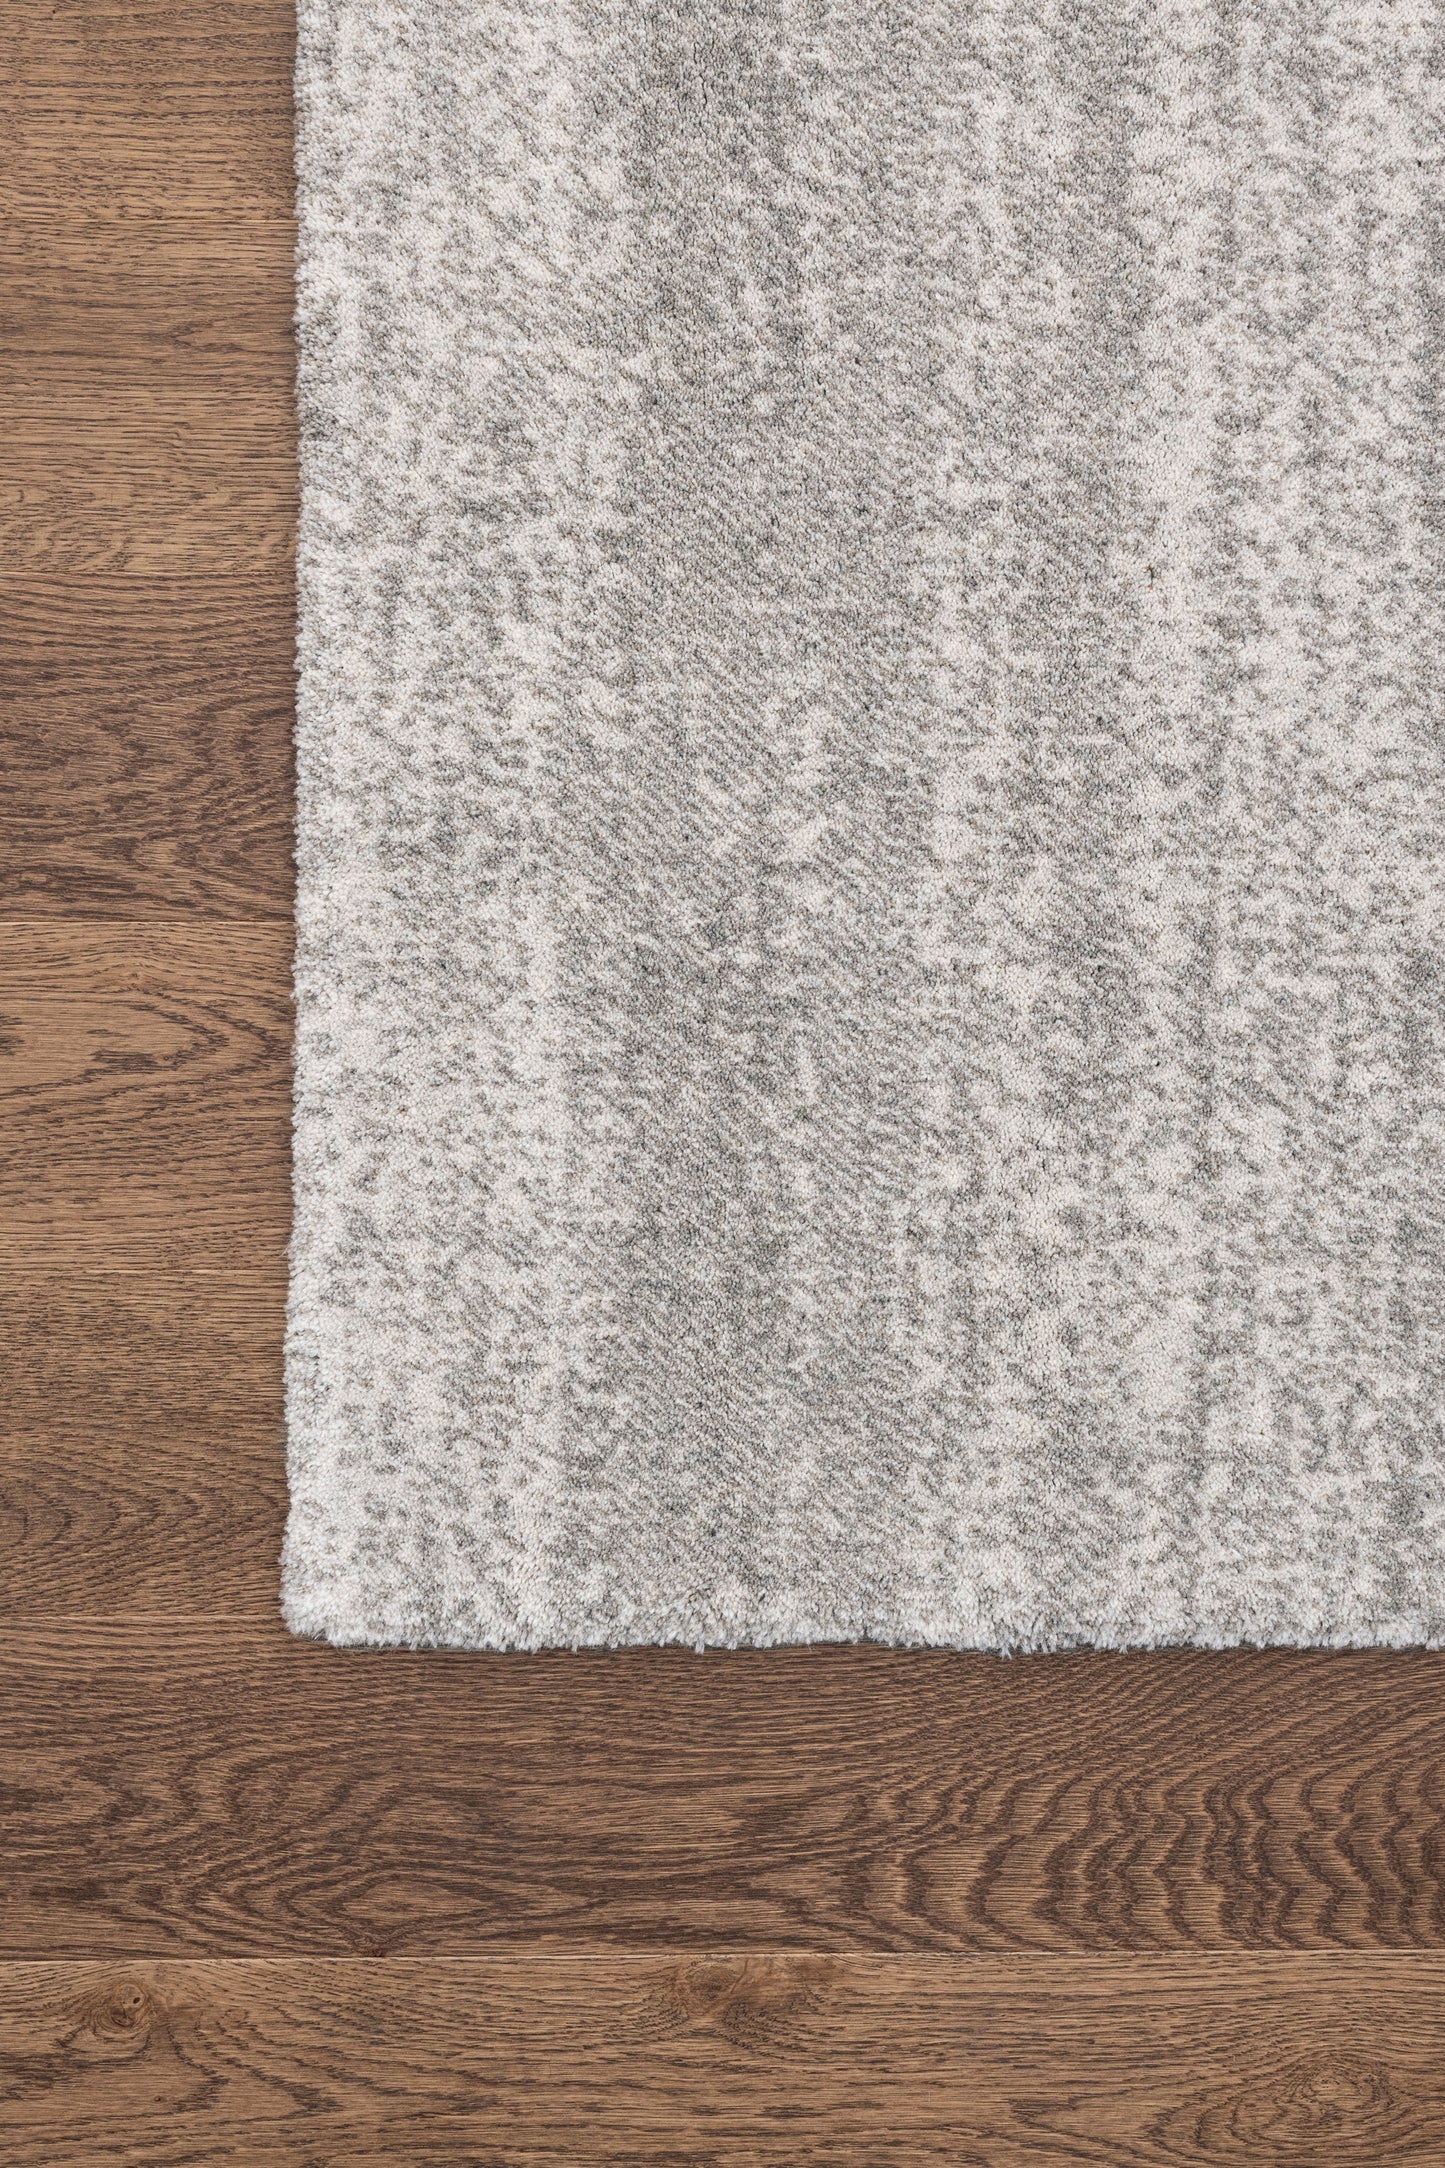 Agnella Rugs Calisia M MADISON Grey - 50% British Wool 50% New Zealand Wool - Free Delivery